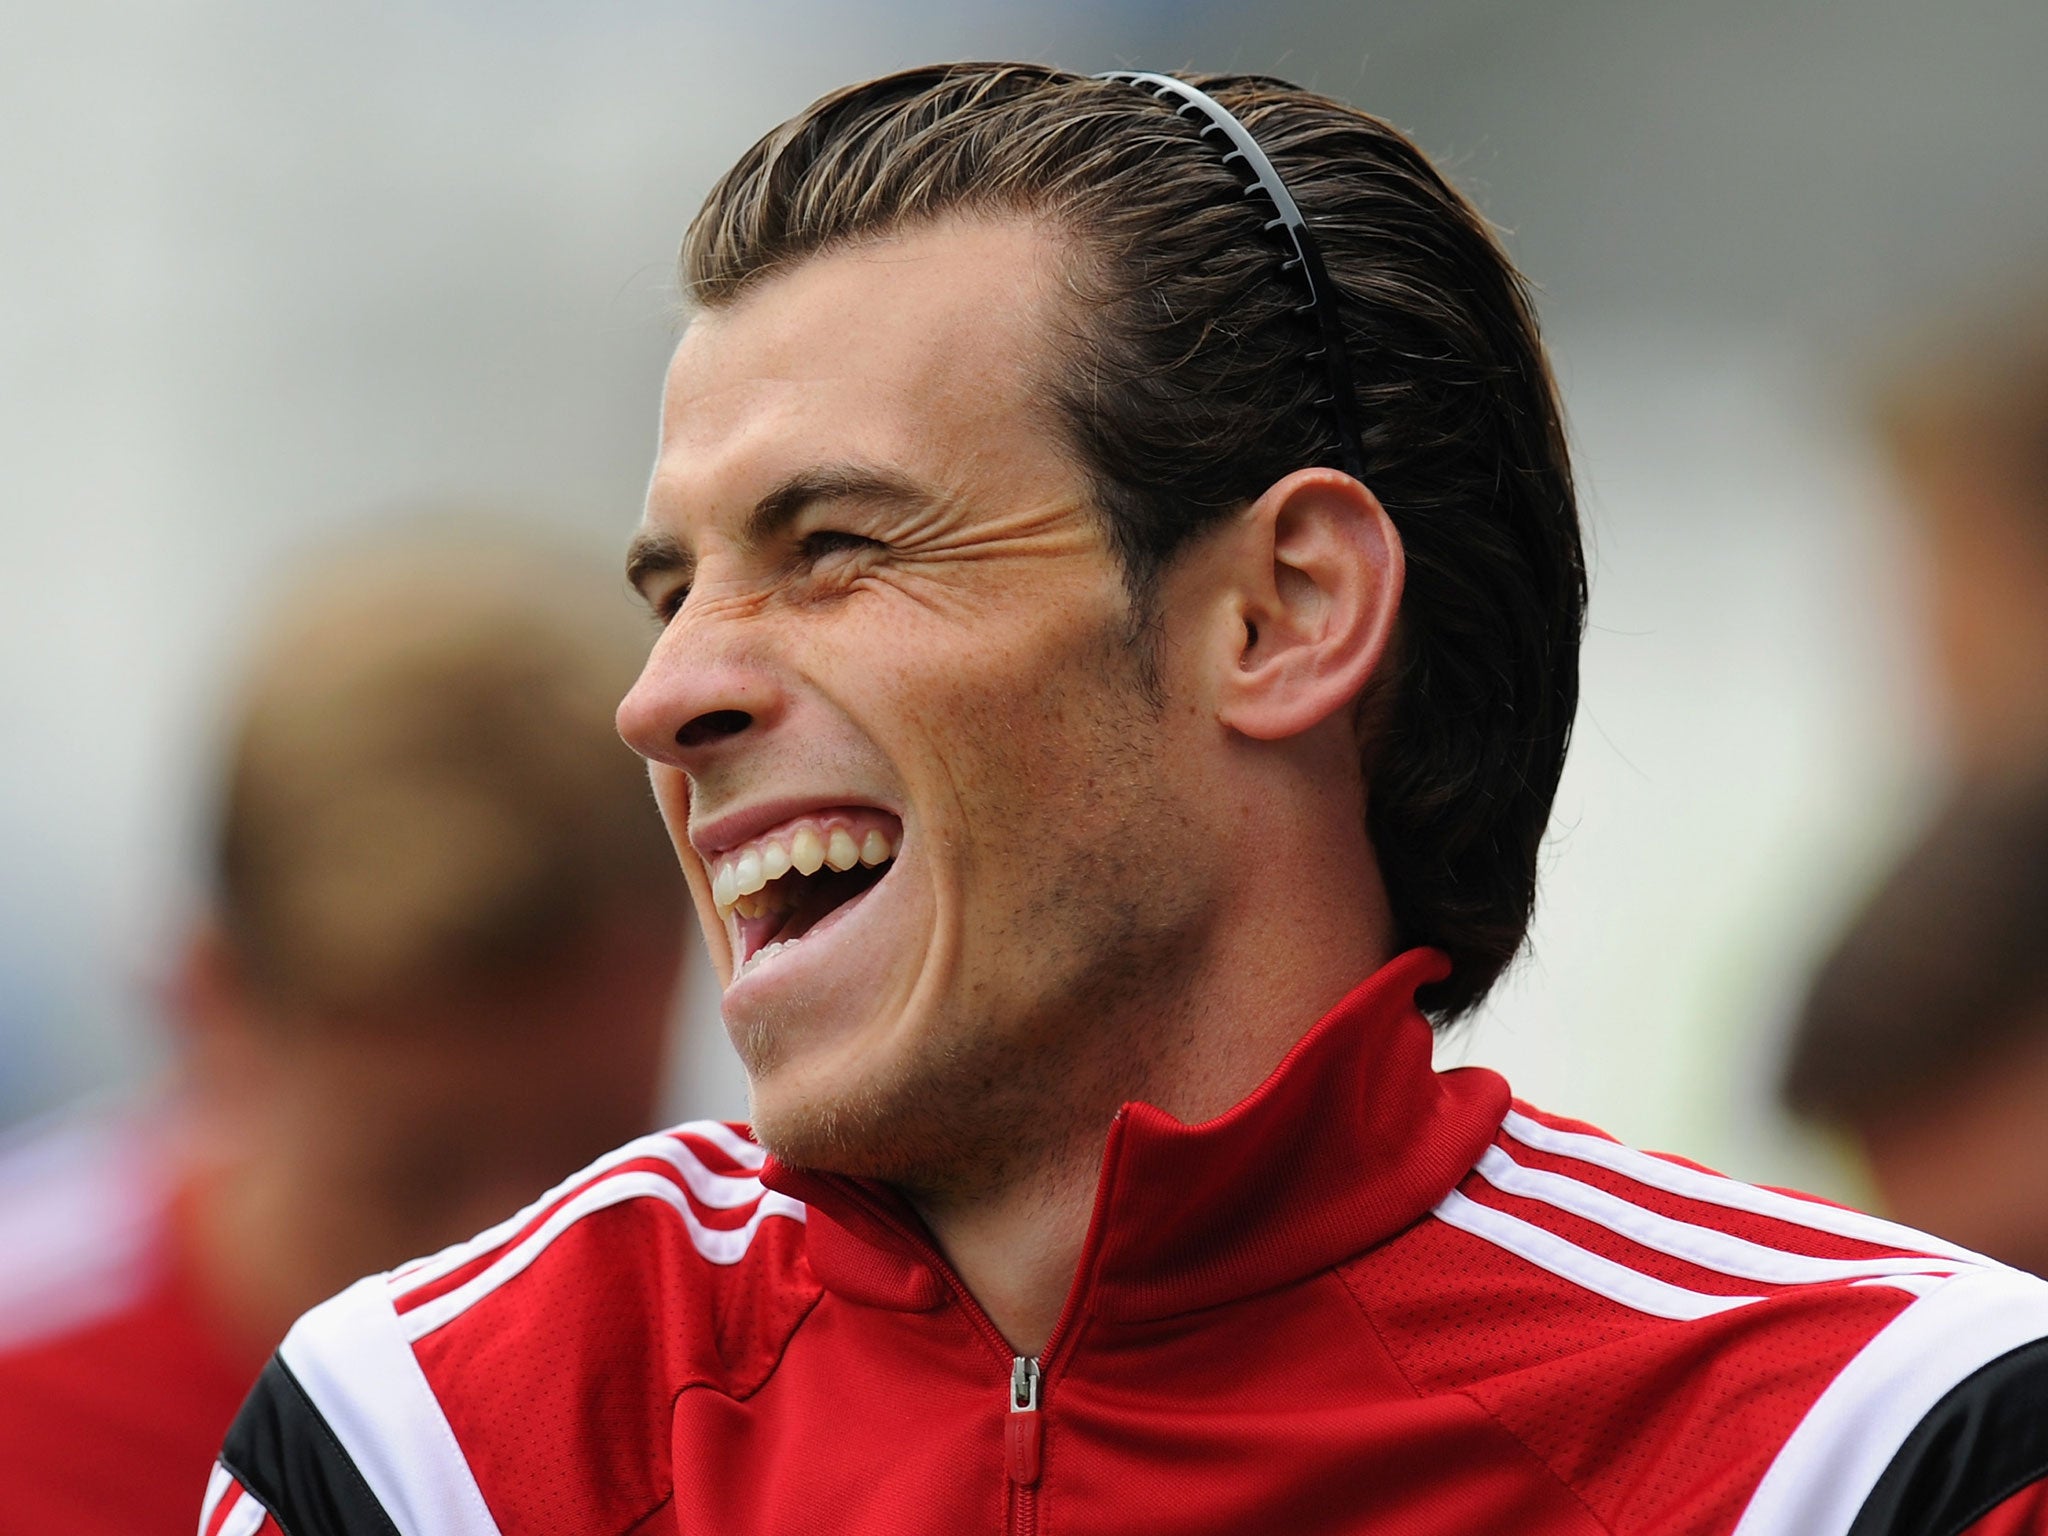 Gareth Bale believes Wales can qualify for their first major tournament since the 1958 World Cup